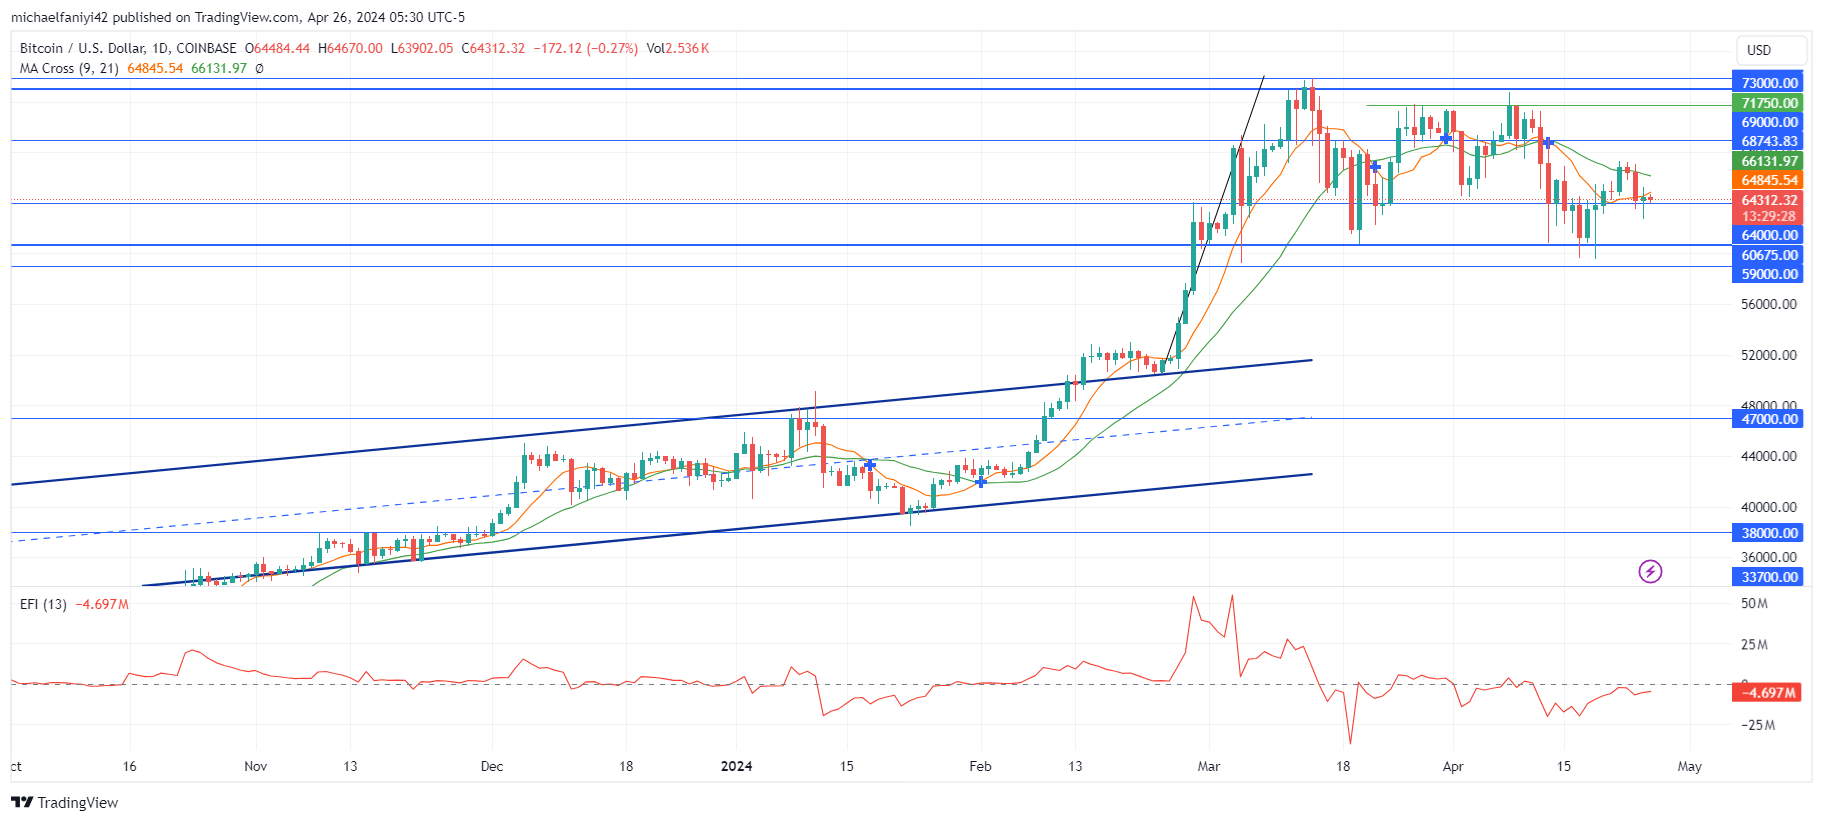 Bitcoin (BTCUSD) Stagnates in Consolidation Phase